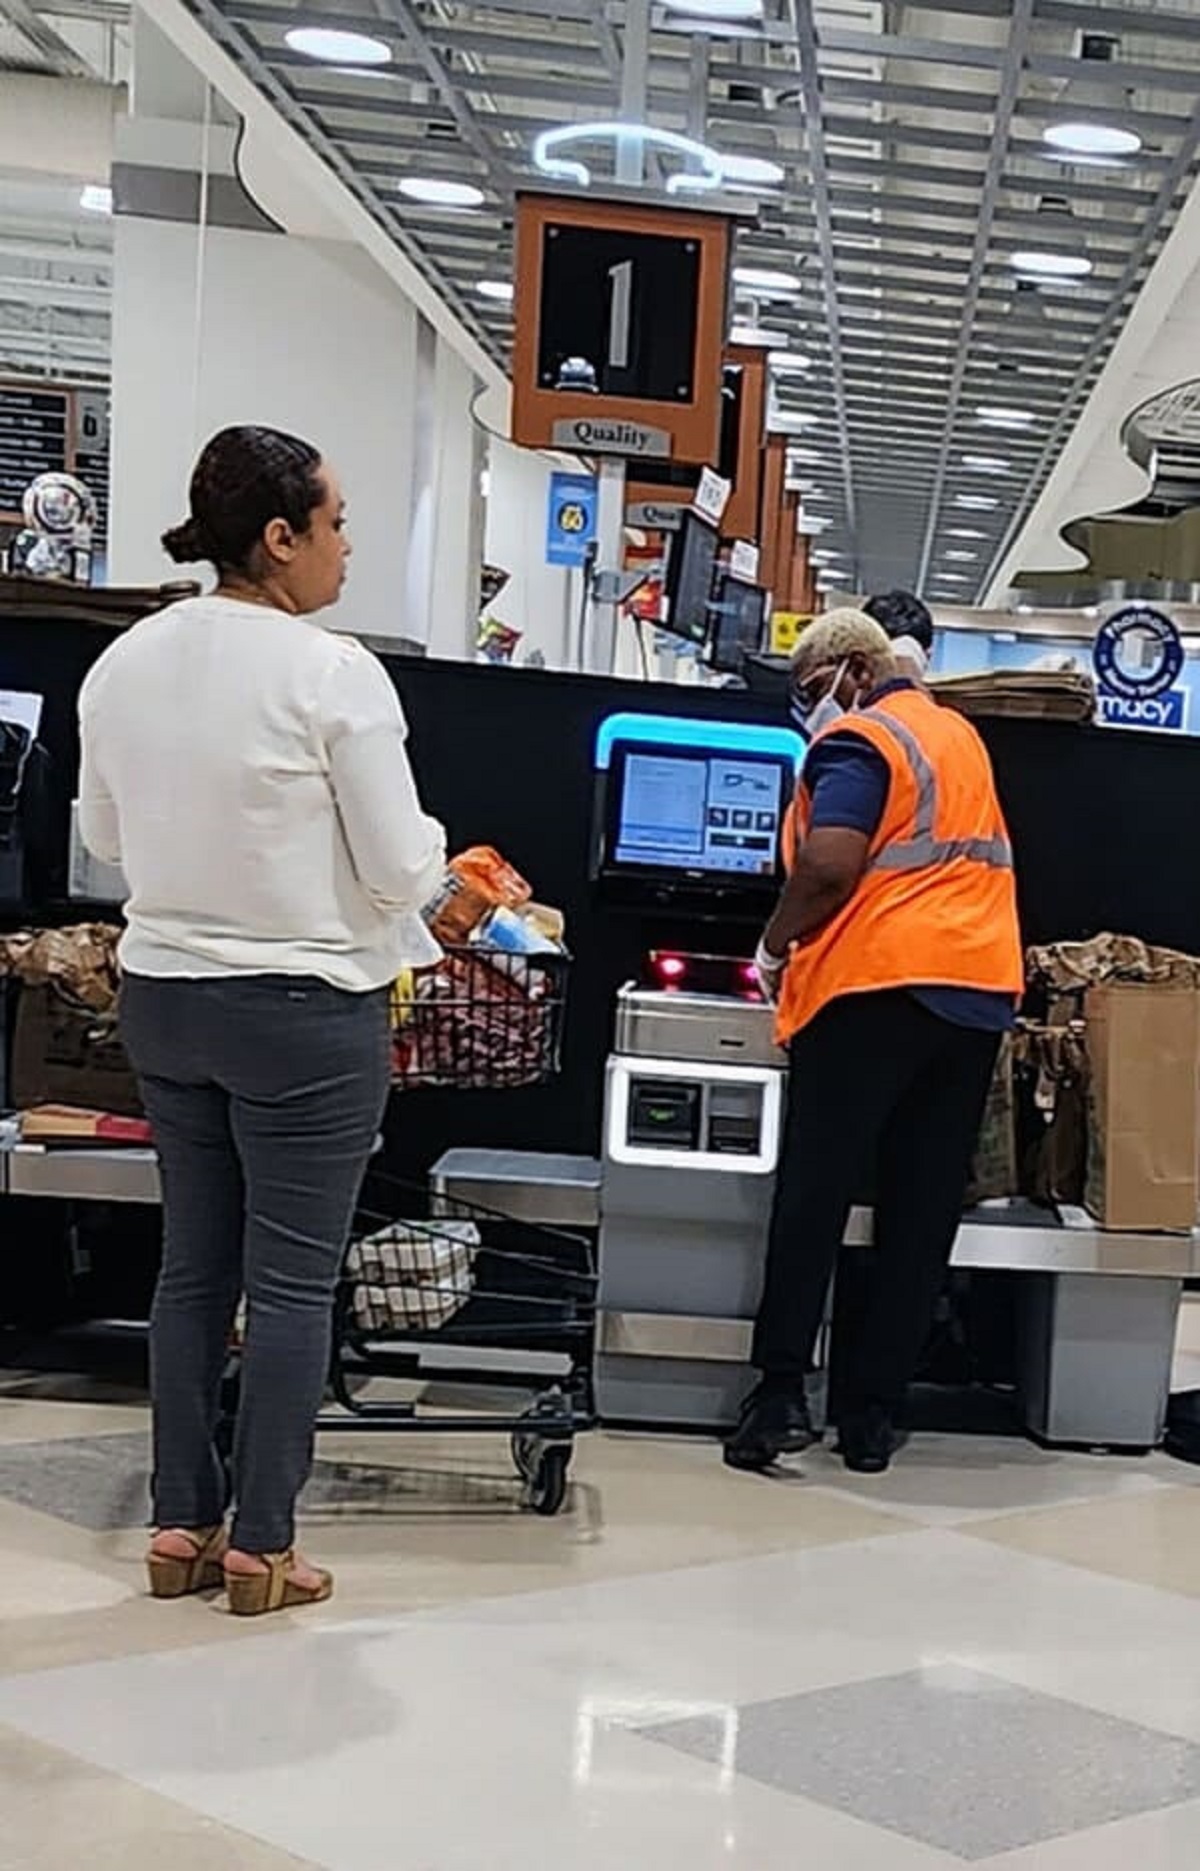 “Lady Goes To Self Checkout, Makes Attendant Unload Her Cart, Scan And Bag Each Item”